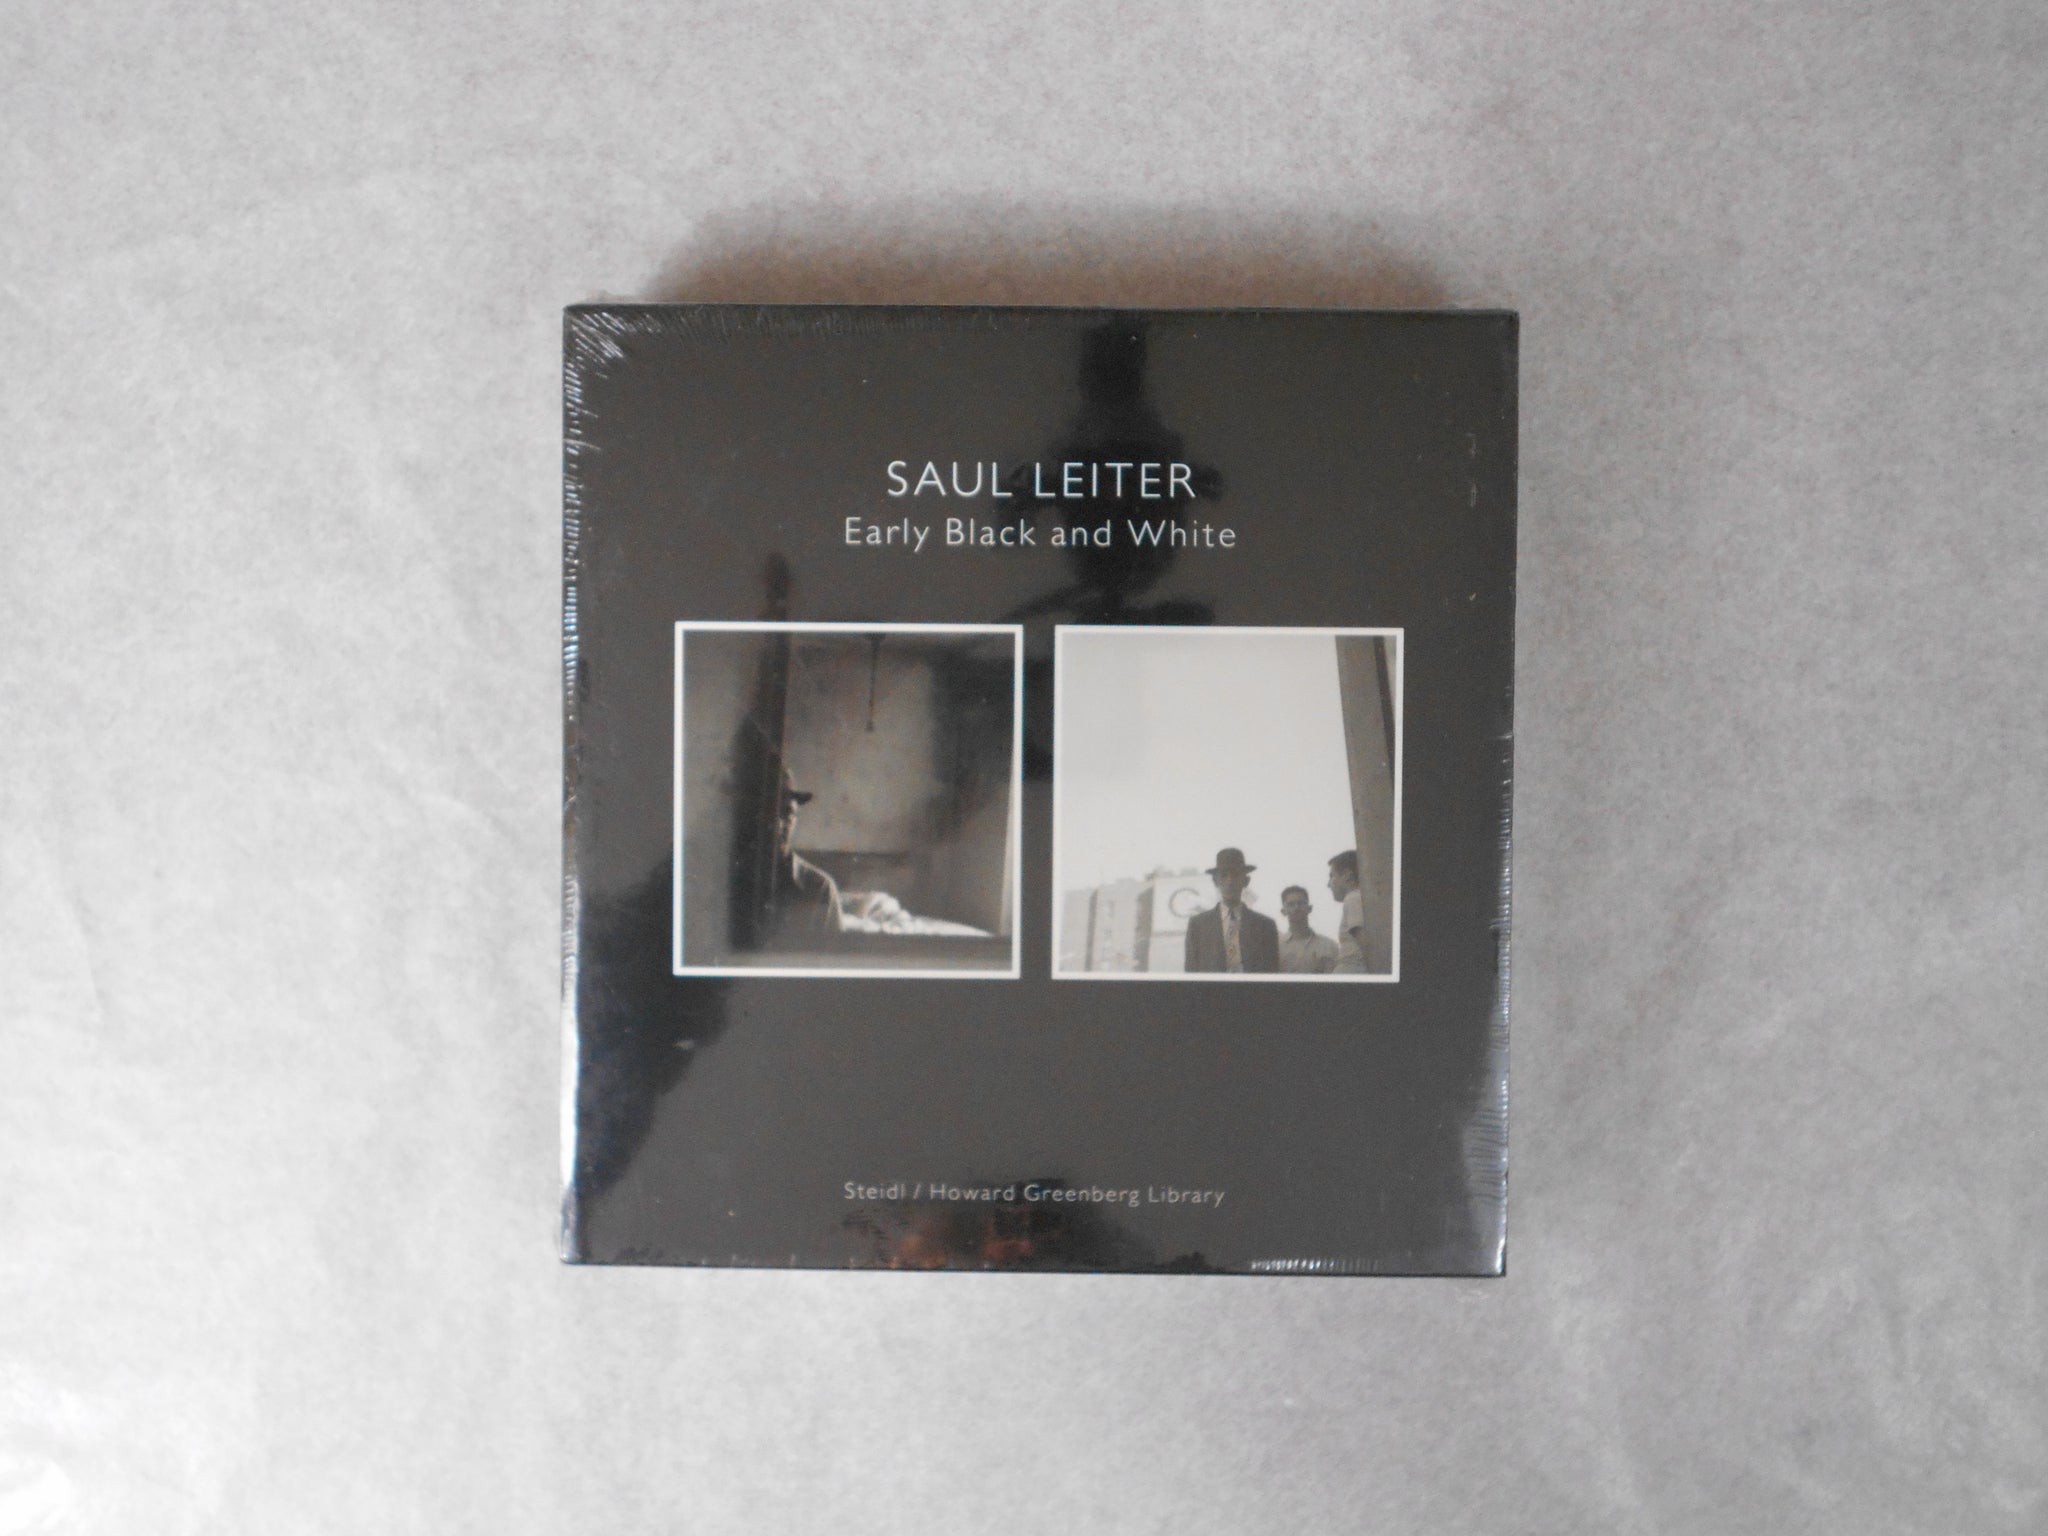 Early Black and White | Saul Leiter | Steidl 2014 (FIRST PRINTING)